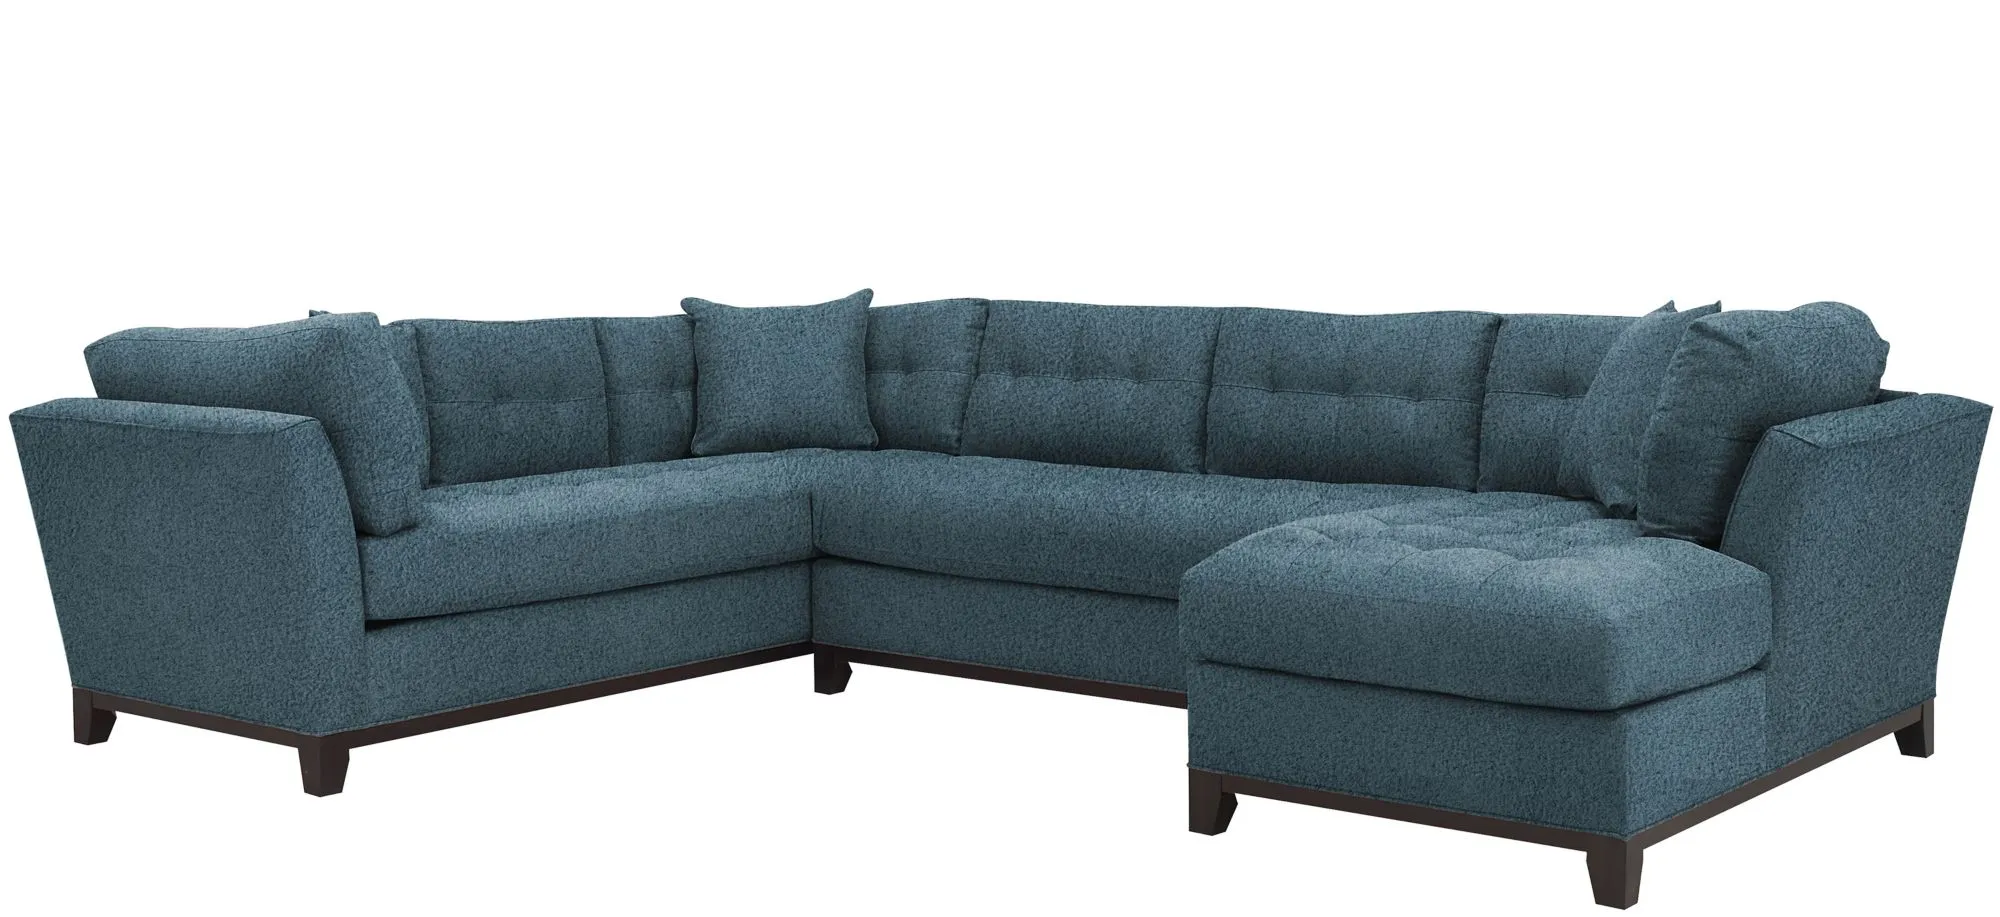 Cityscape 3-pc. Sectional in Suede So Soft Indigo by H.M. Richards